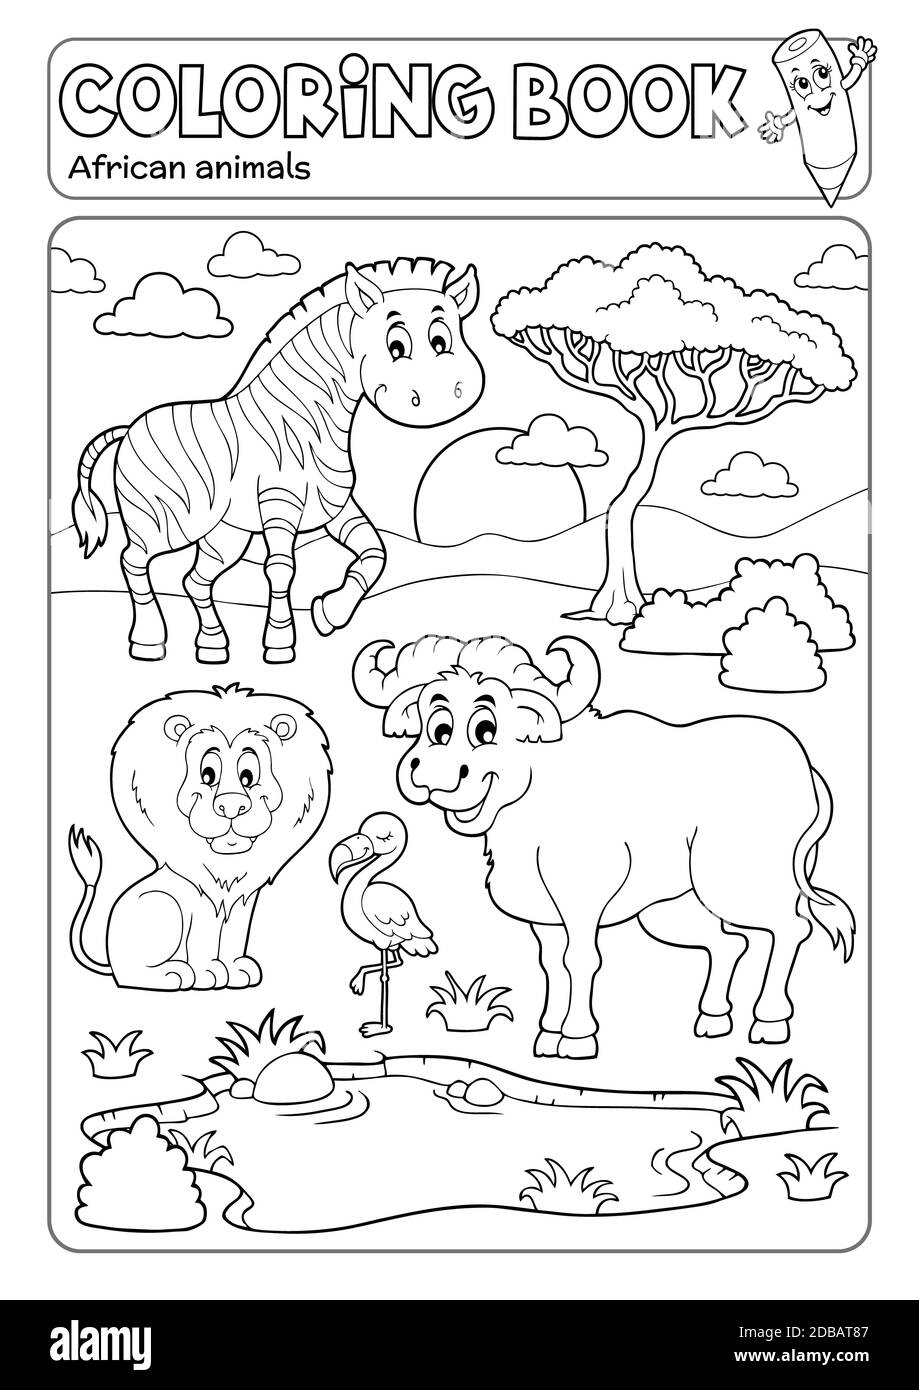 Coloring book African fauna 20   picture illustration Stock Photo ...